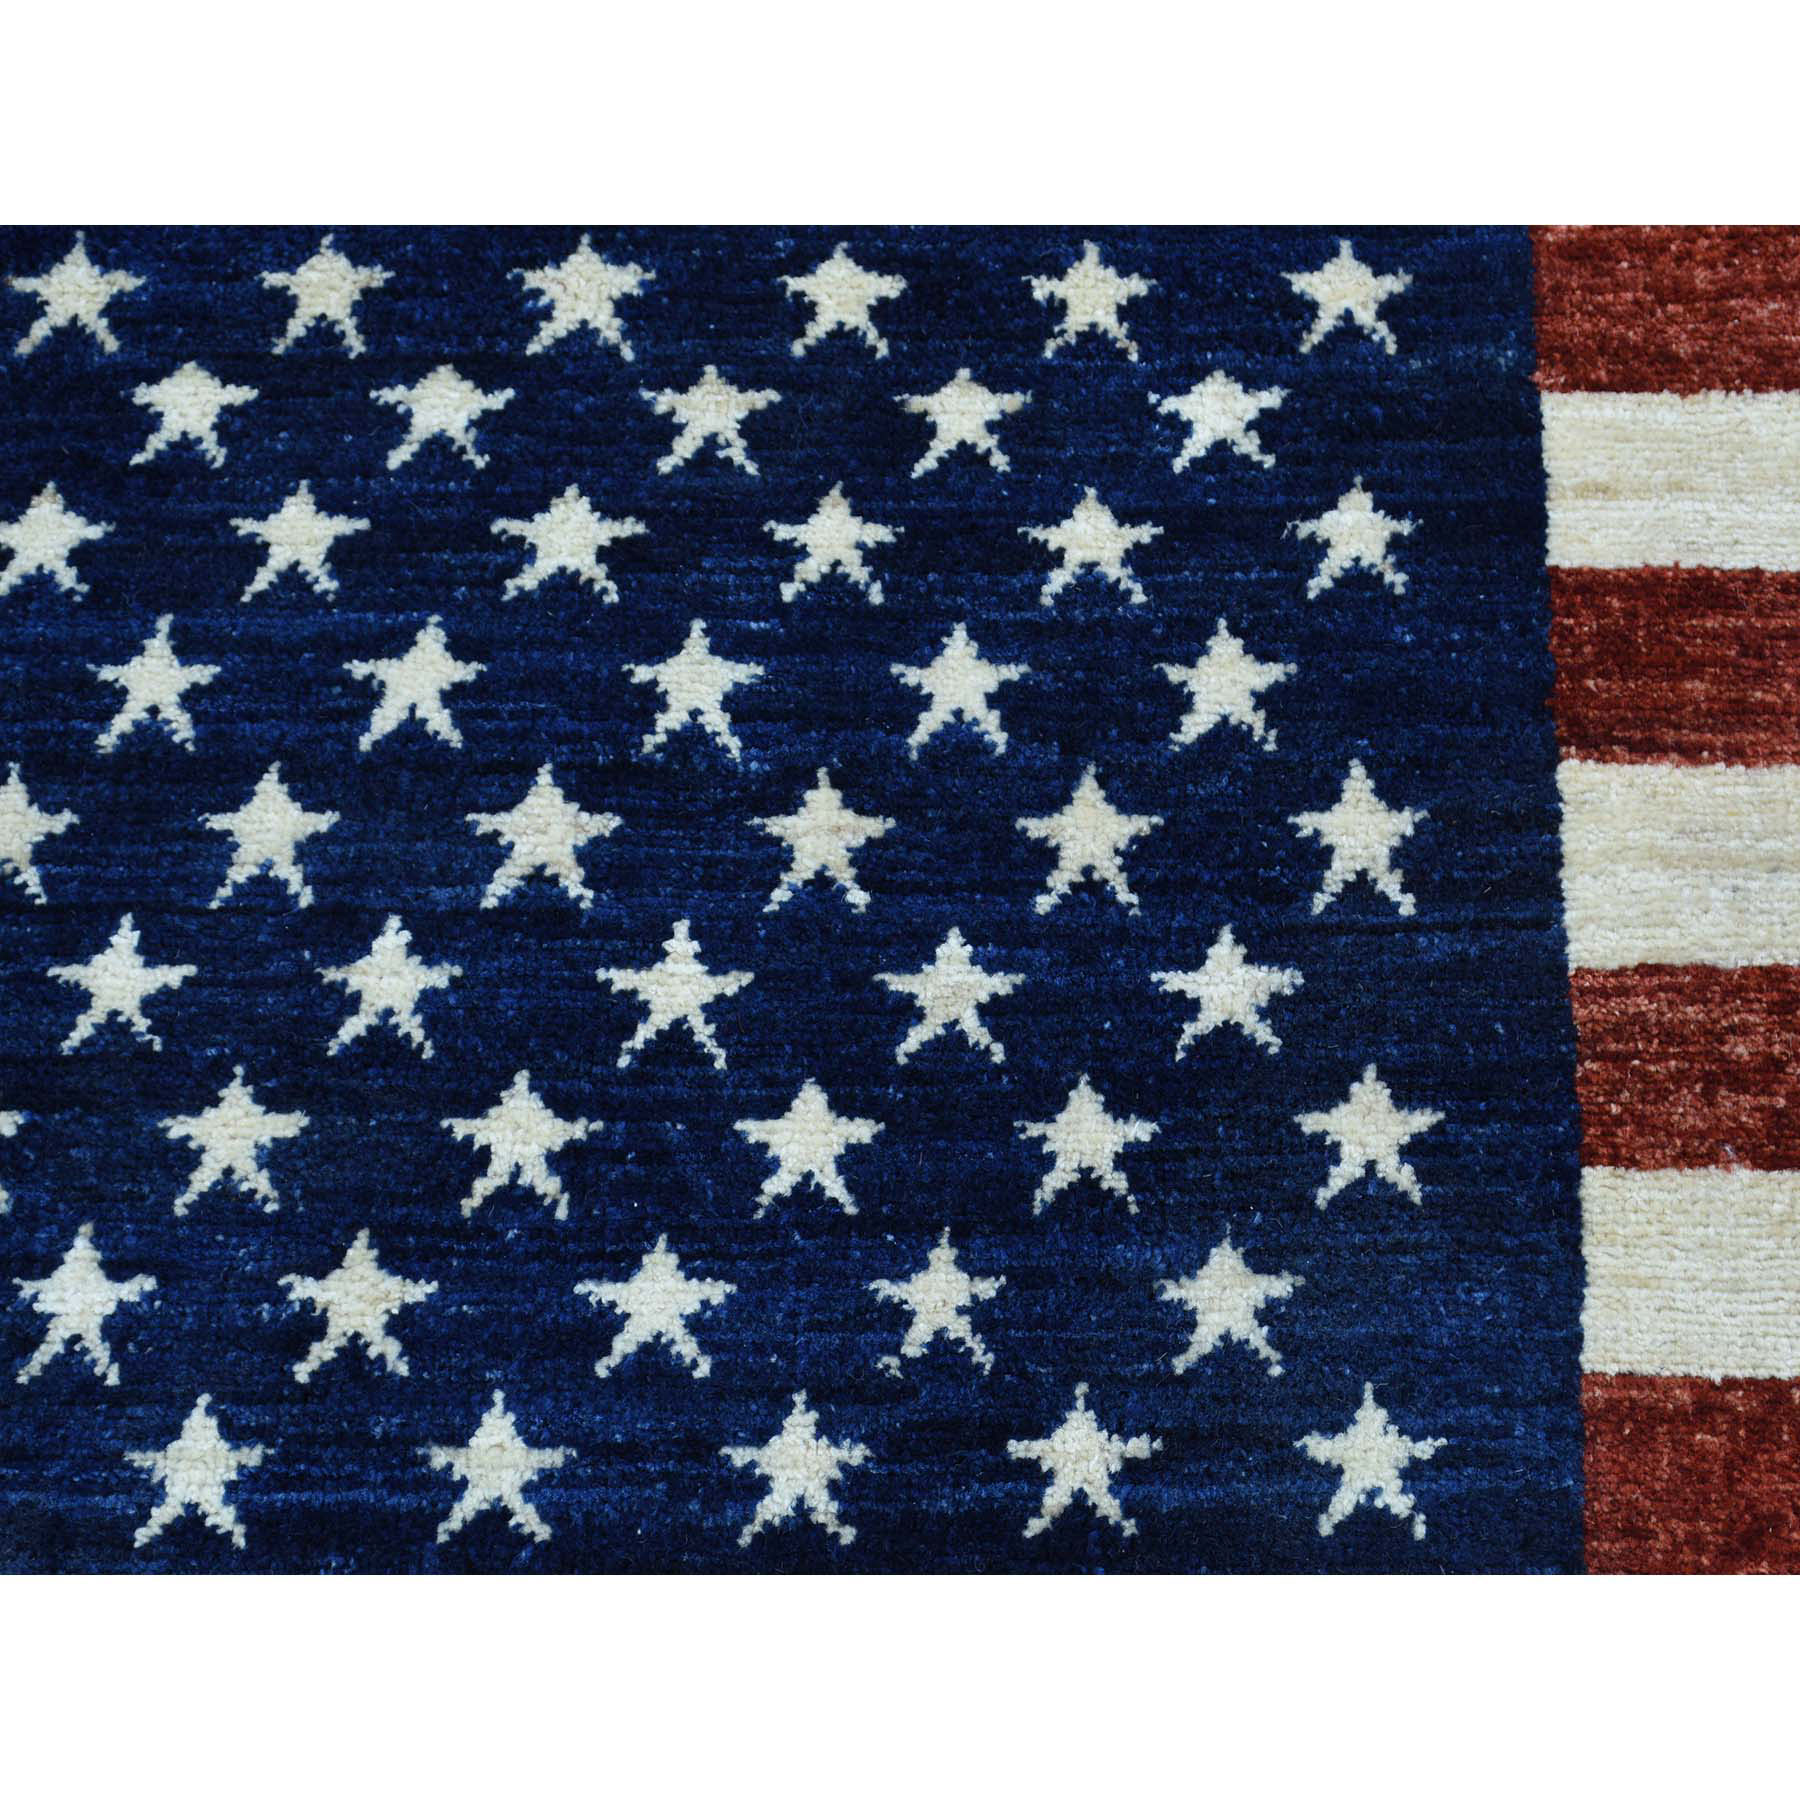 2-7 x3-10  Hand-Knotted Pure Wool Peshawar American Flag Wall Hanging Rug 